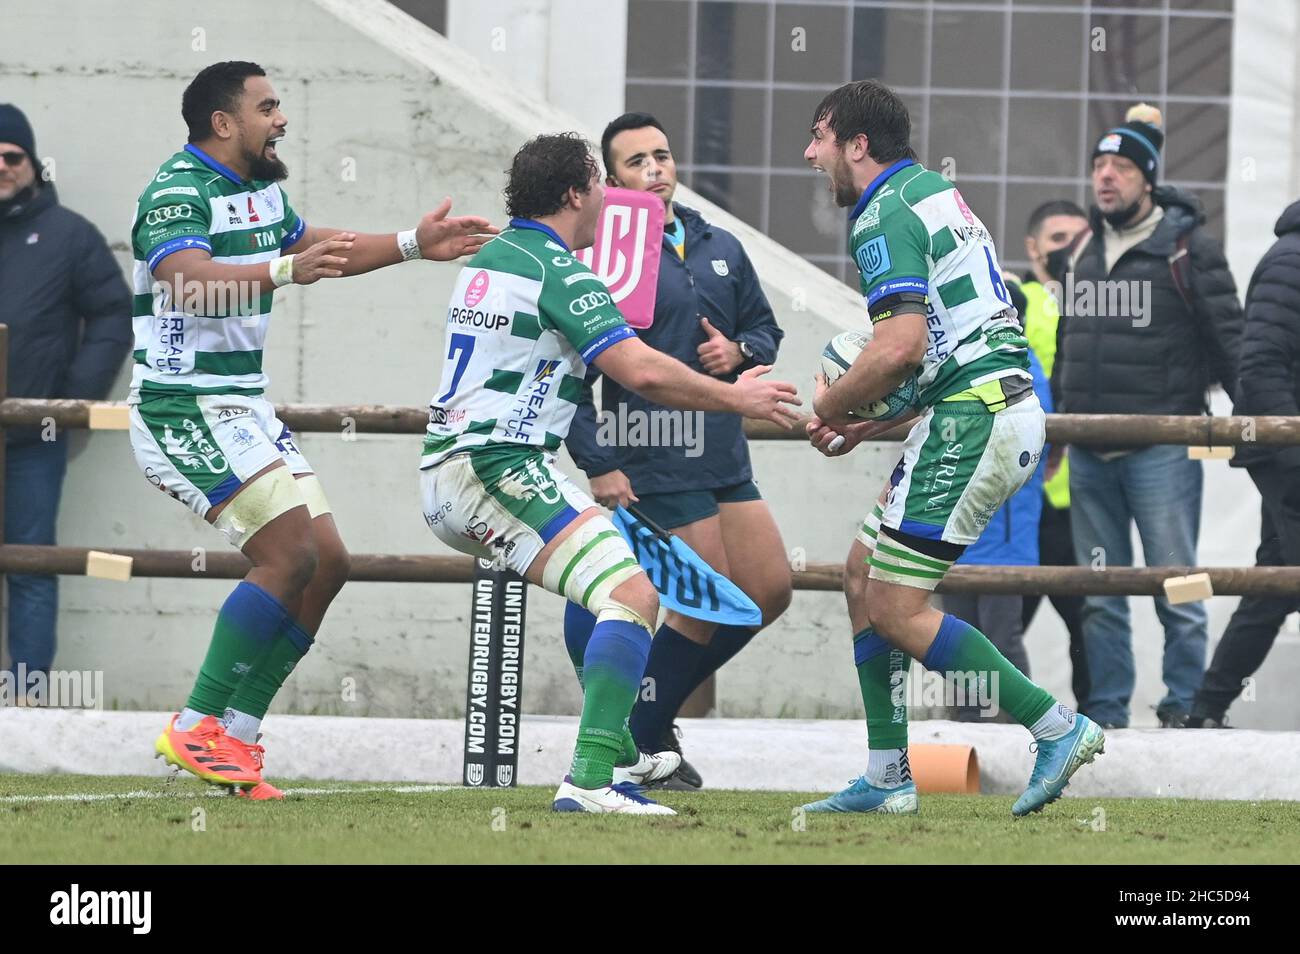 Parma, Italia. 24th dic, 2021. benetton festeggia la prova durante Zebre  Rugby Club vs Benetton Rugby, United Rugby Championship match a Parma,  Italy, December 24 2021 Credit: Independent Photo Agency/Alamy Live News